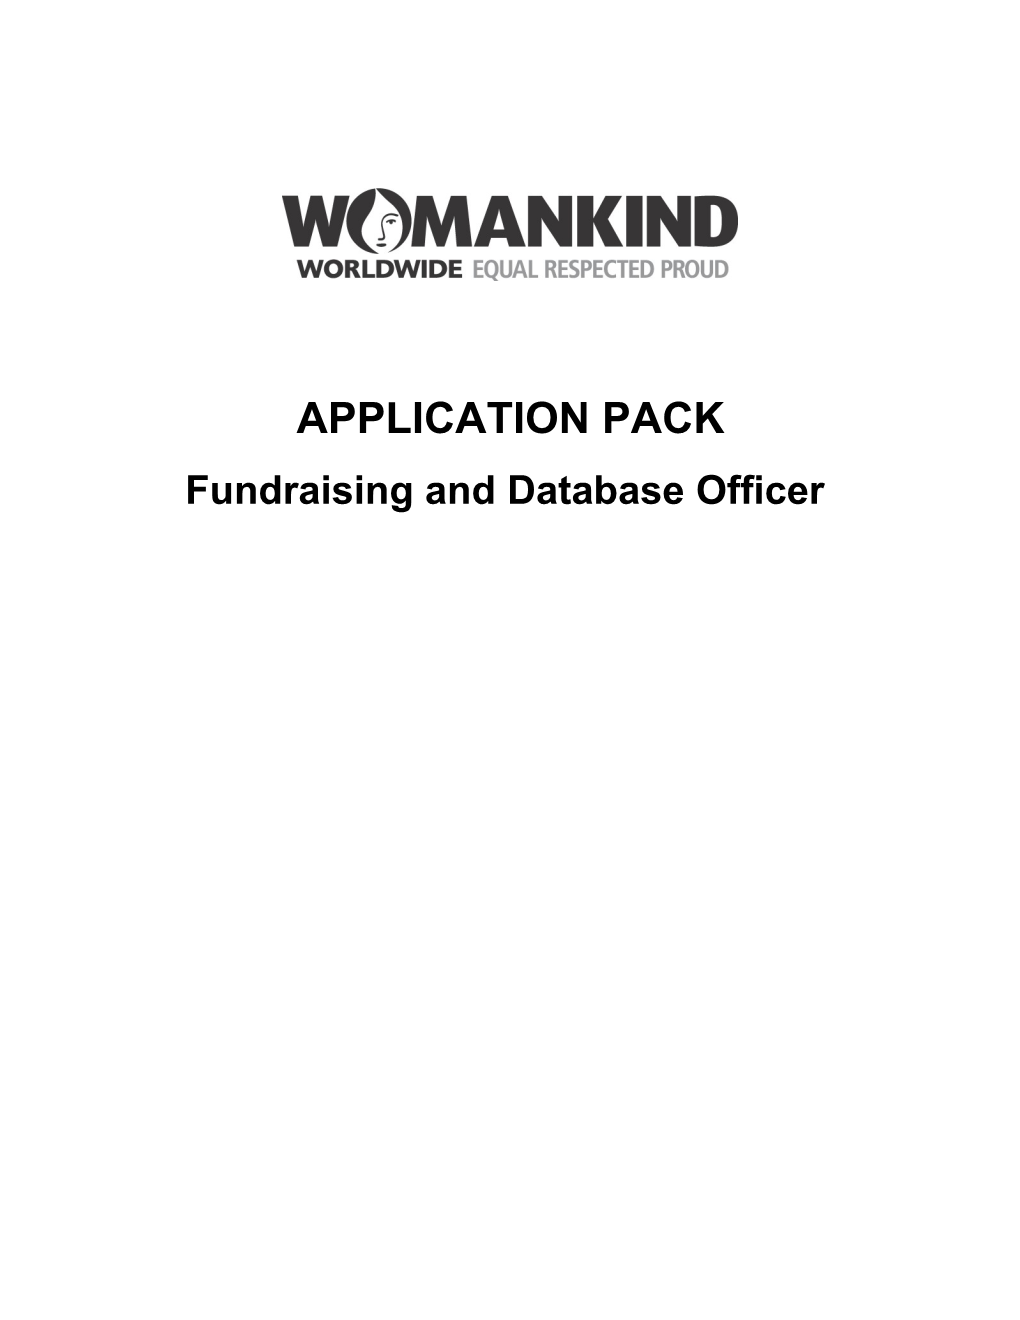 Fundraising and Database Officer